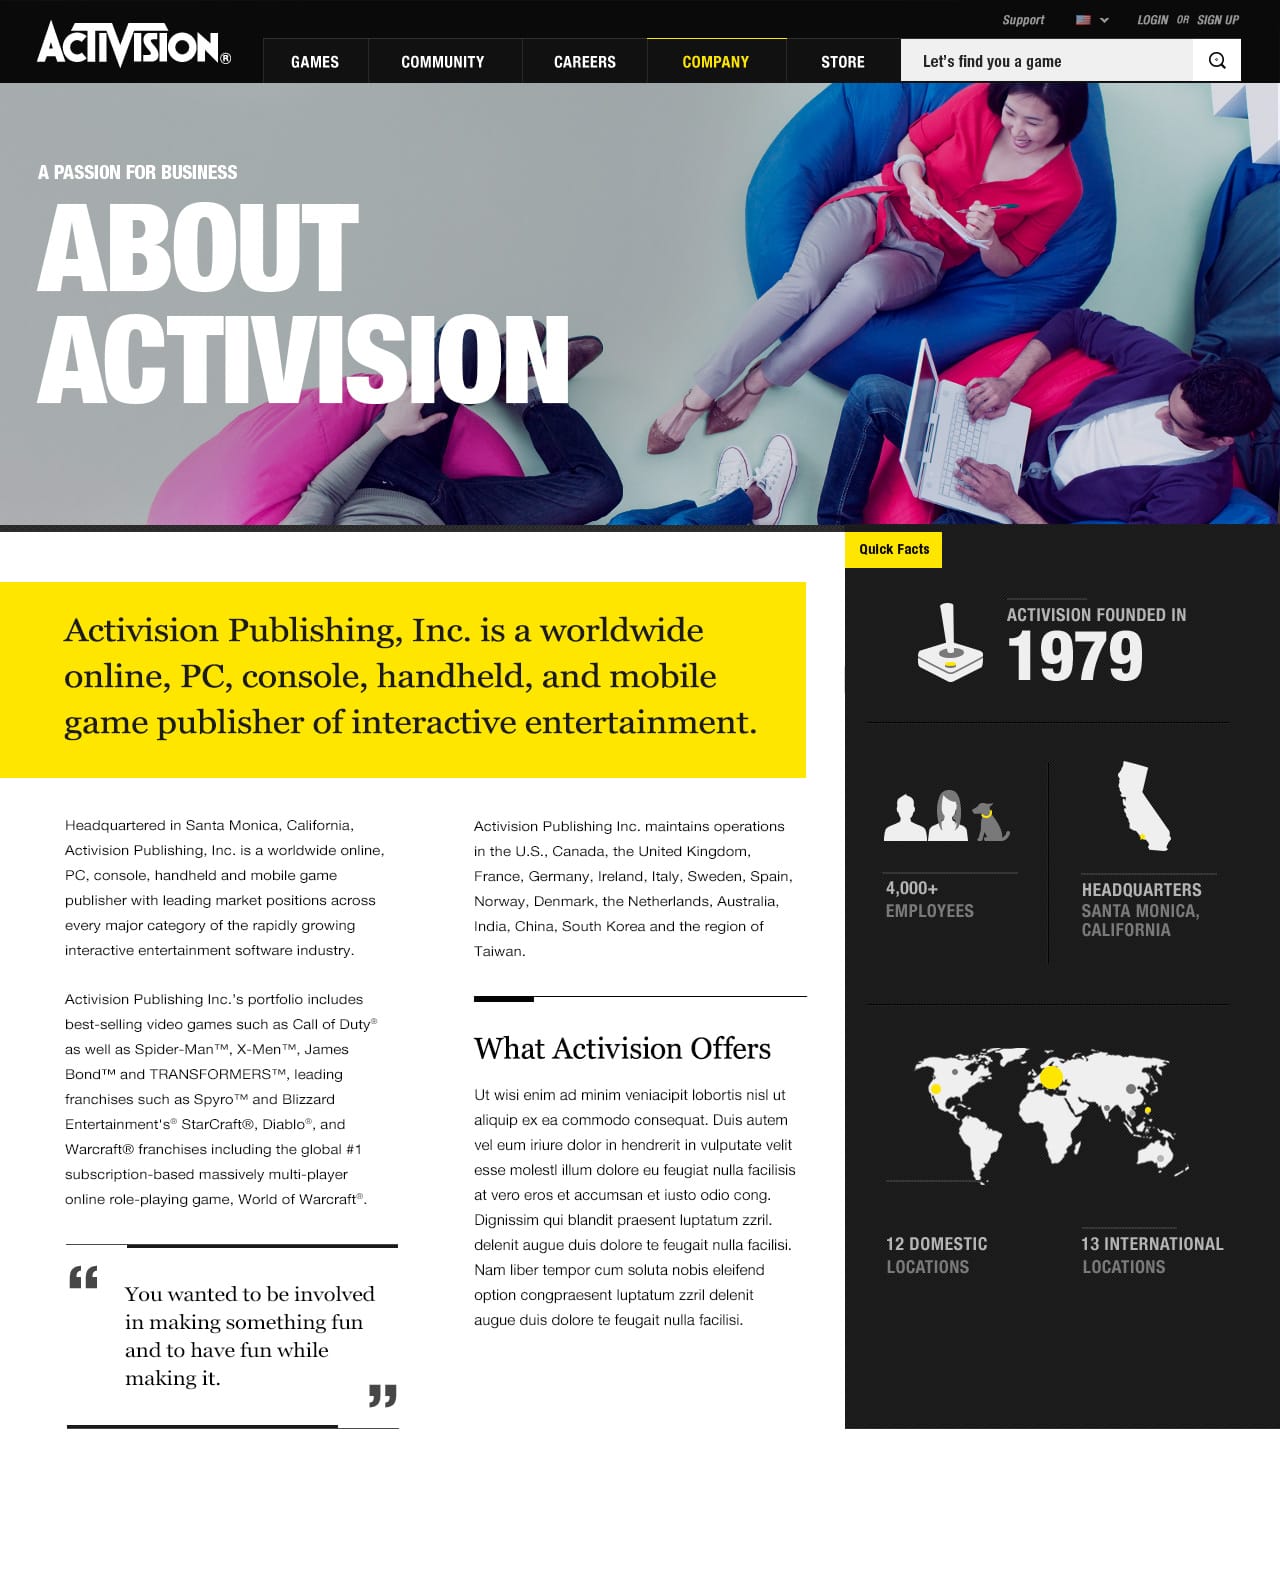 Activision_AboutUs